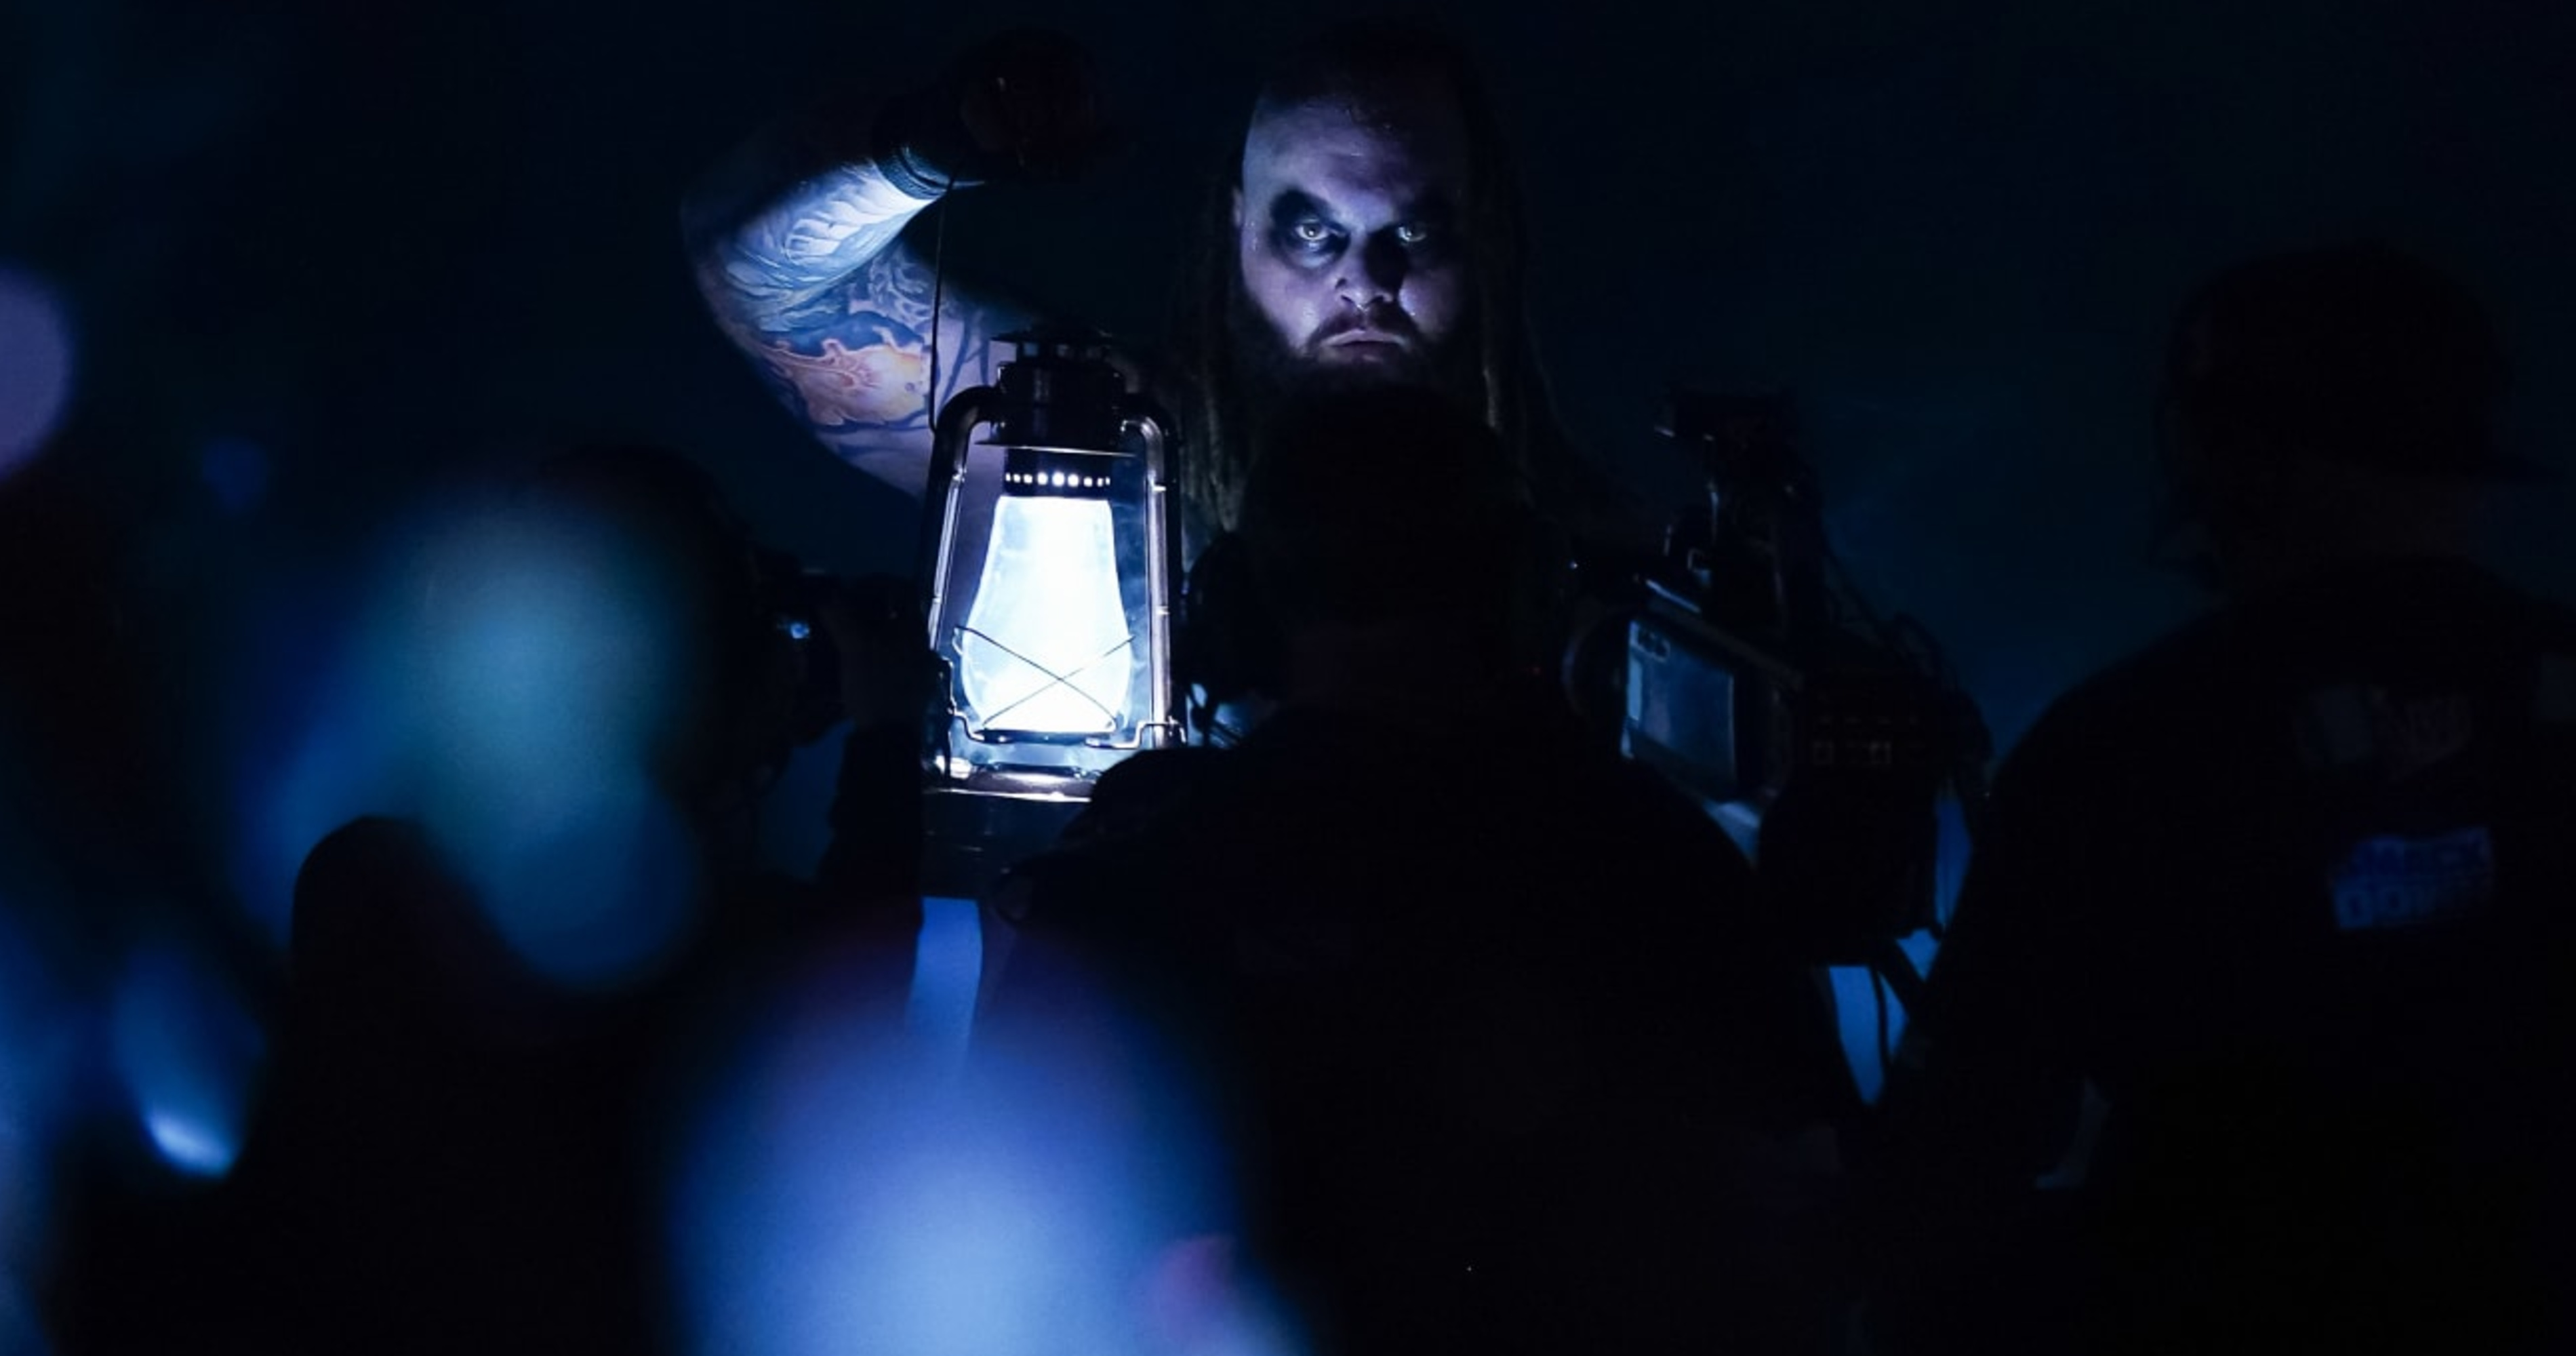 What's Next for 'The Fiend' Bray Wyatt After Retaining Title at Survivor  Series?, News, Scores, Highlights, Stats, and Rumors